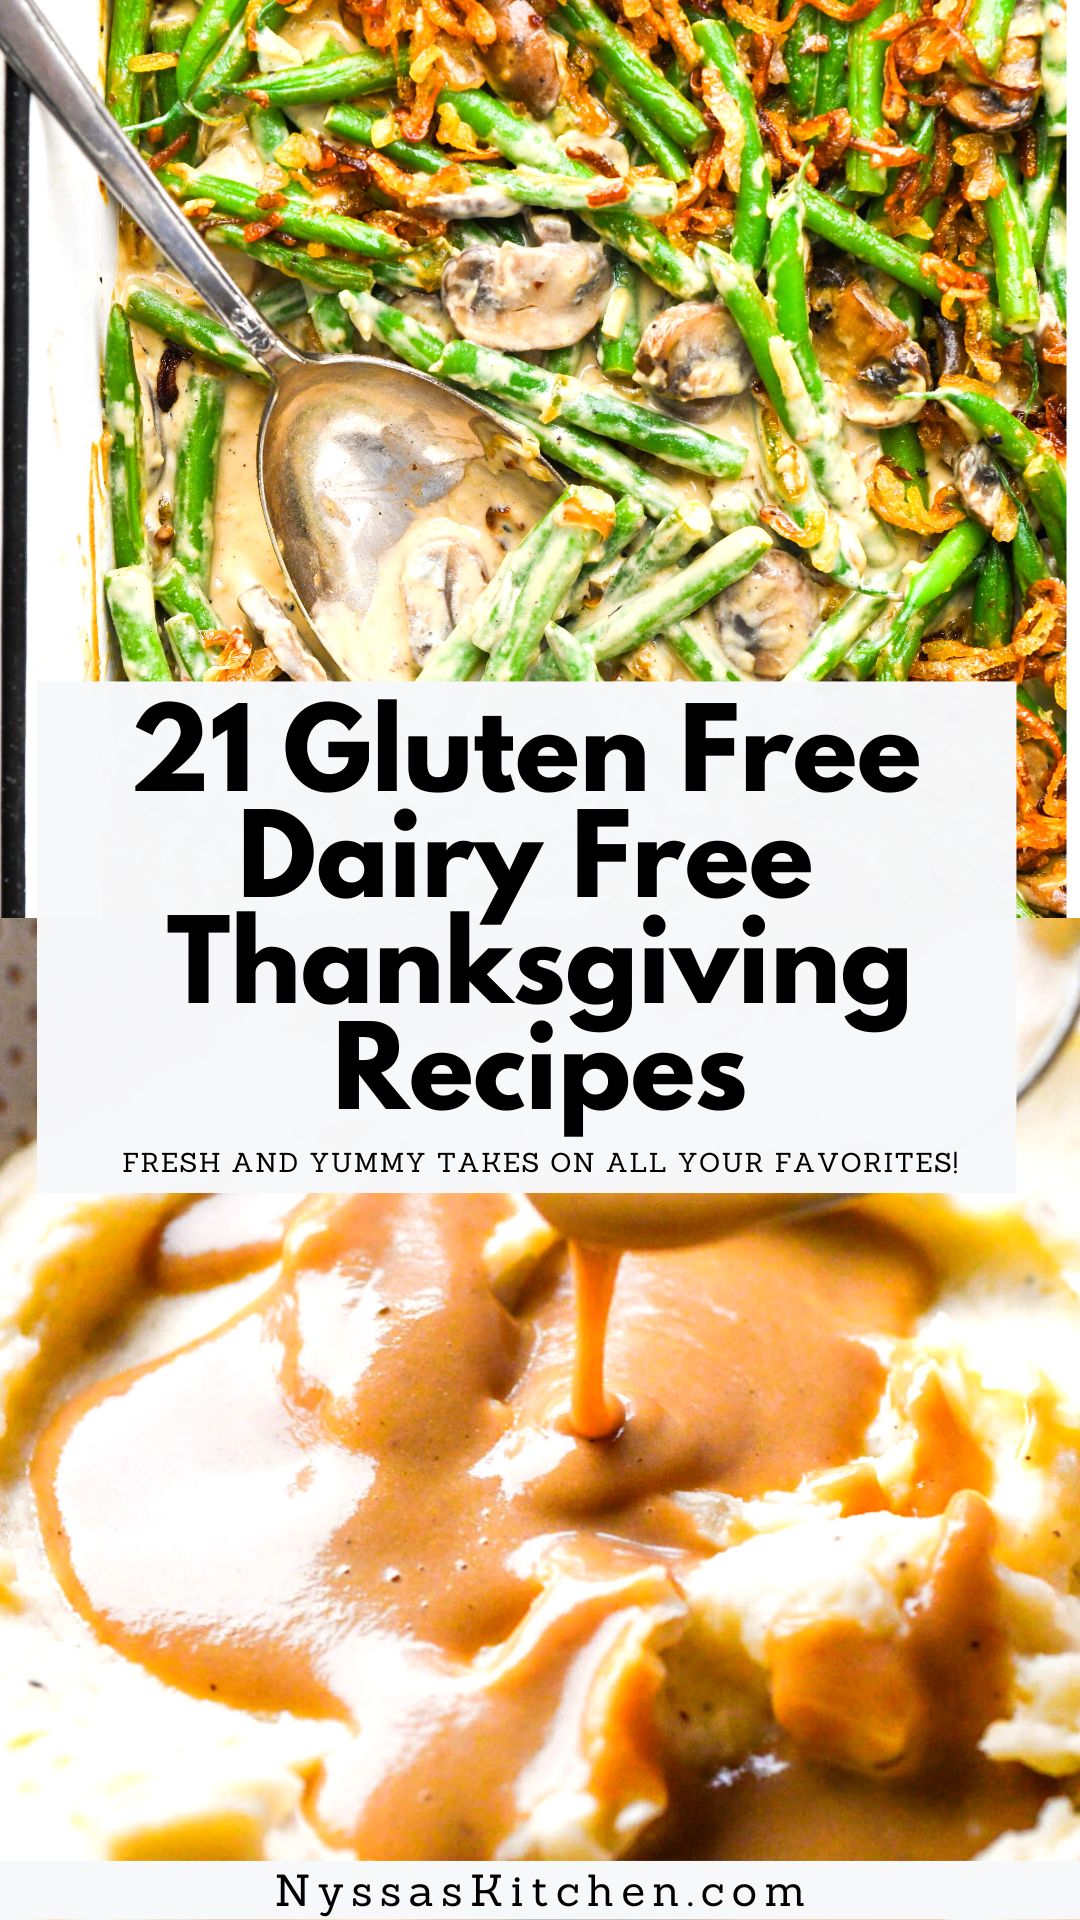 The holidays are here! And so are all the delicious meals and treats that come along with them. Here are 21 of our favorite (mouthwatering!) gluten free AND dairy free Thanksgiving recipes.